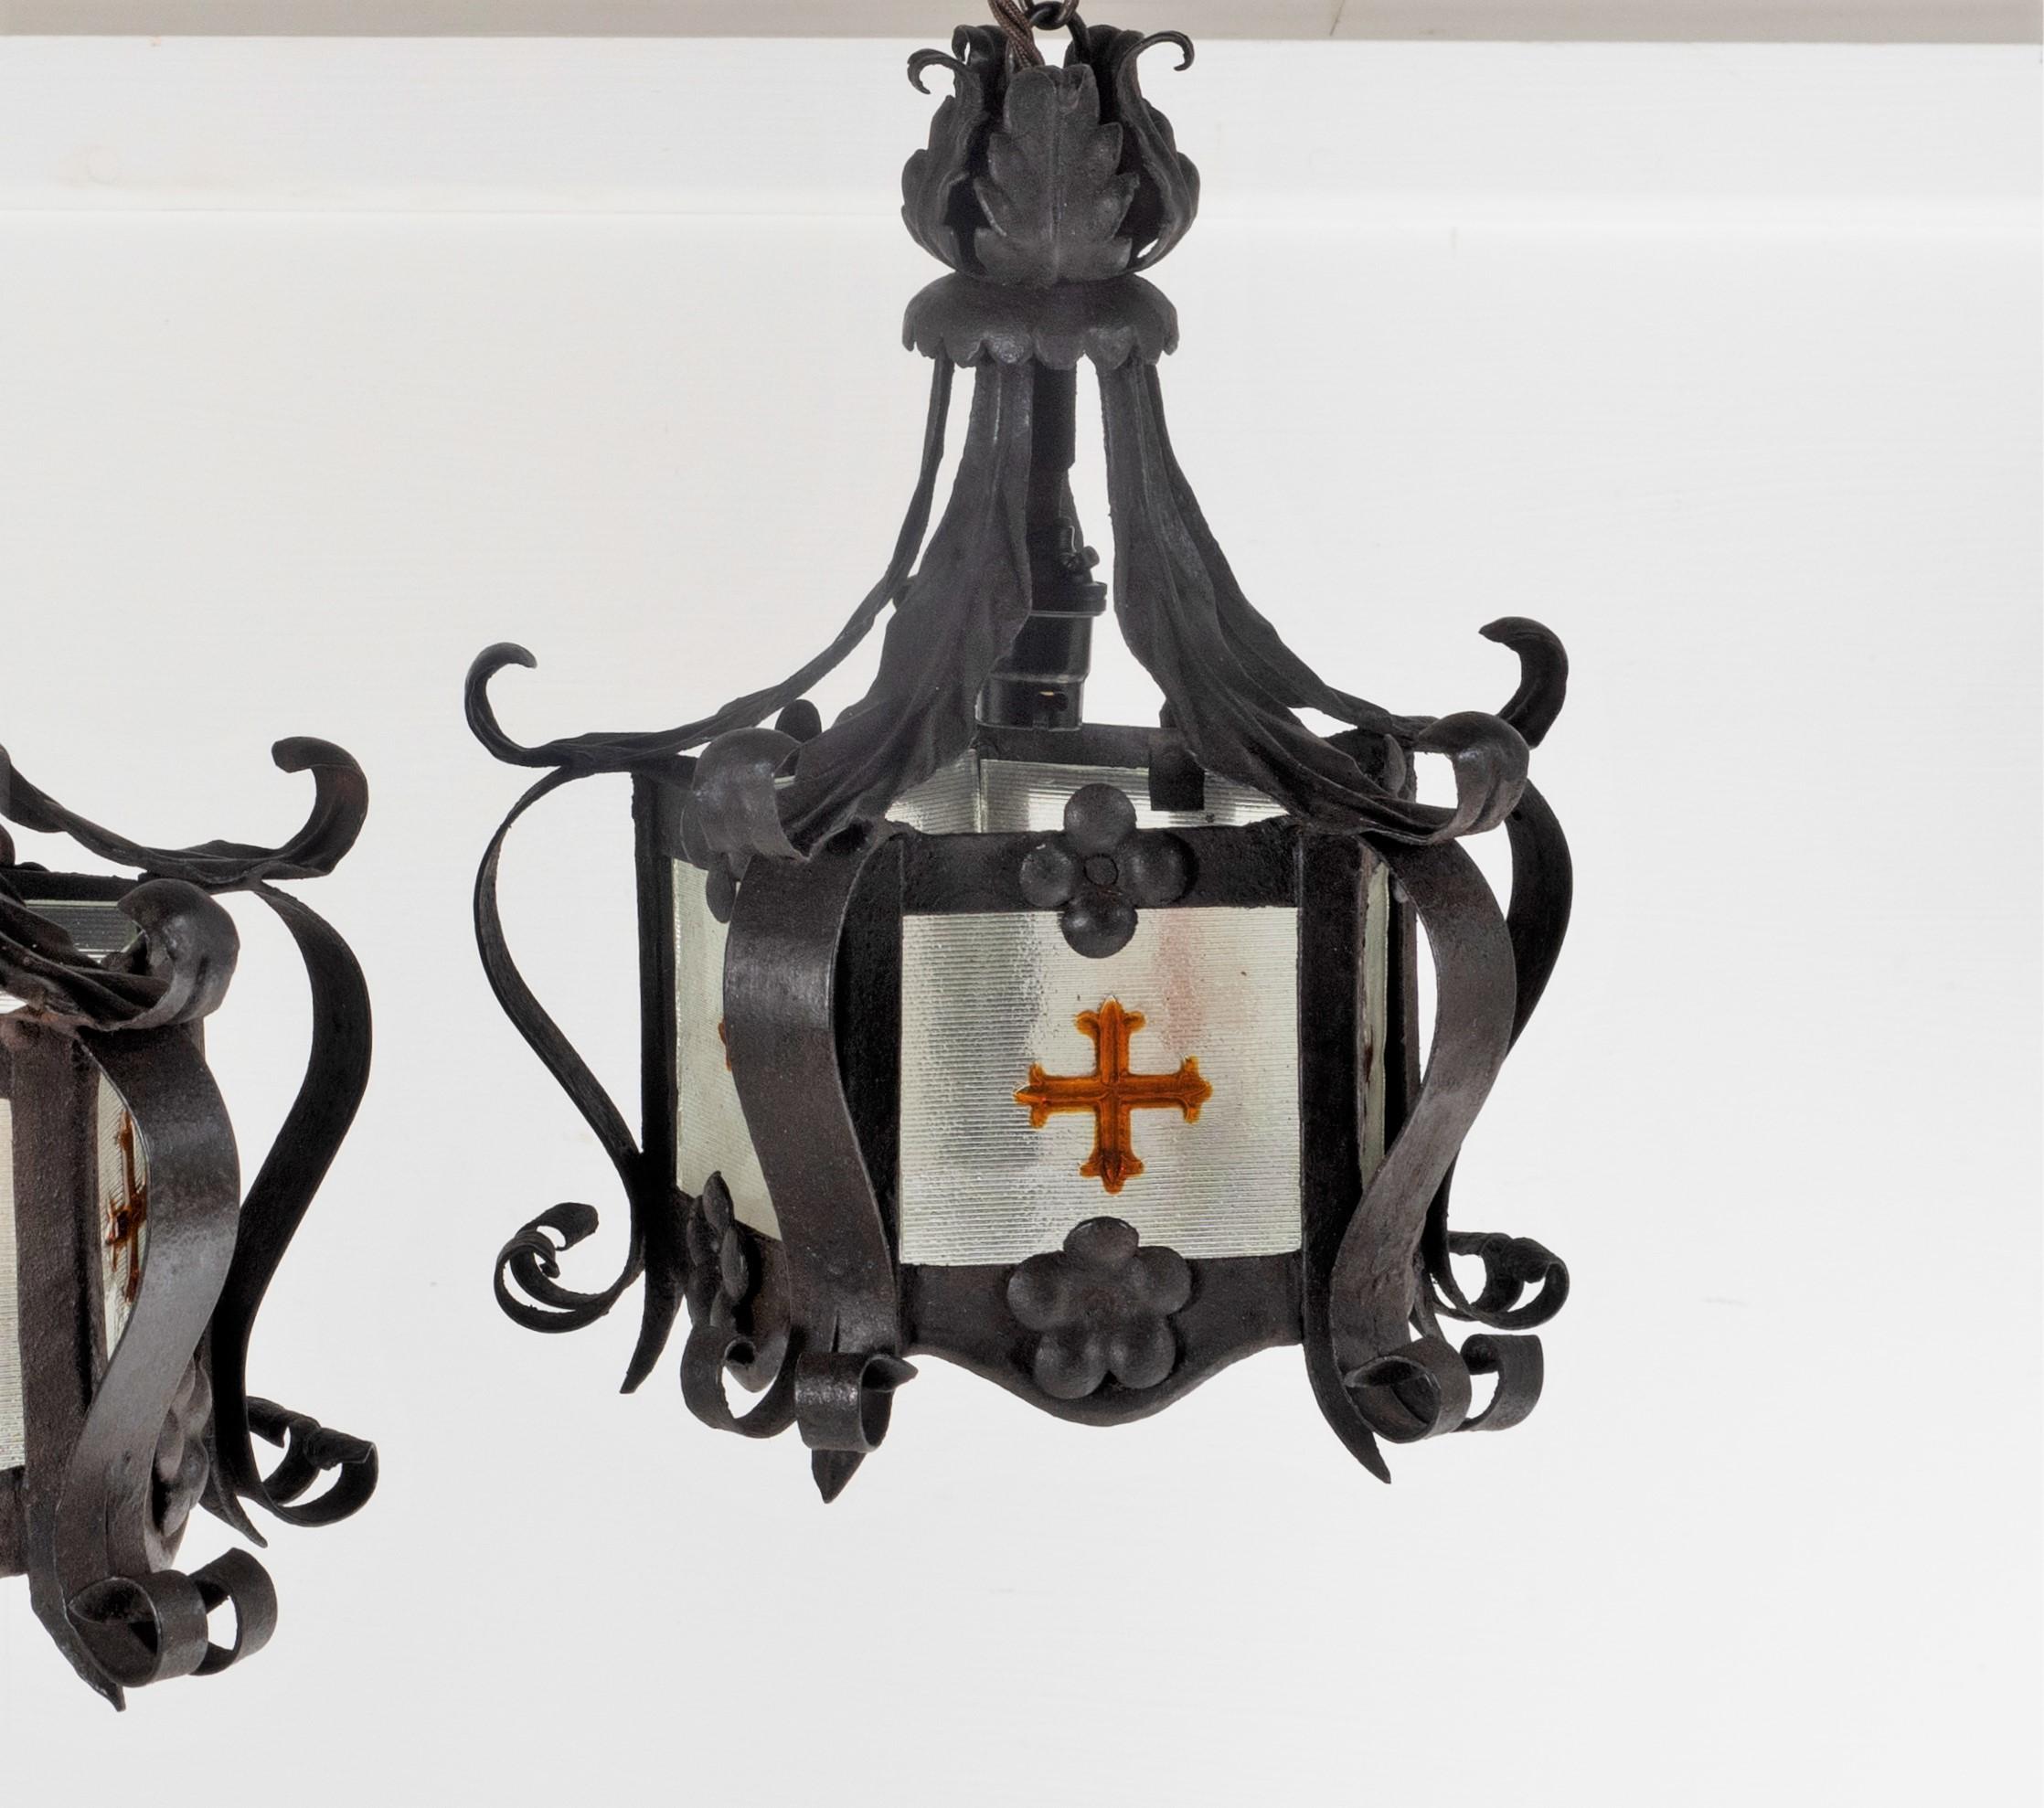 Pair of Glazed 19th C, Aesthetic Lantern Pendants with Gothic Stained Glass In Good Condition For Sale In Llanbrynmair, GB